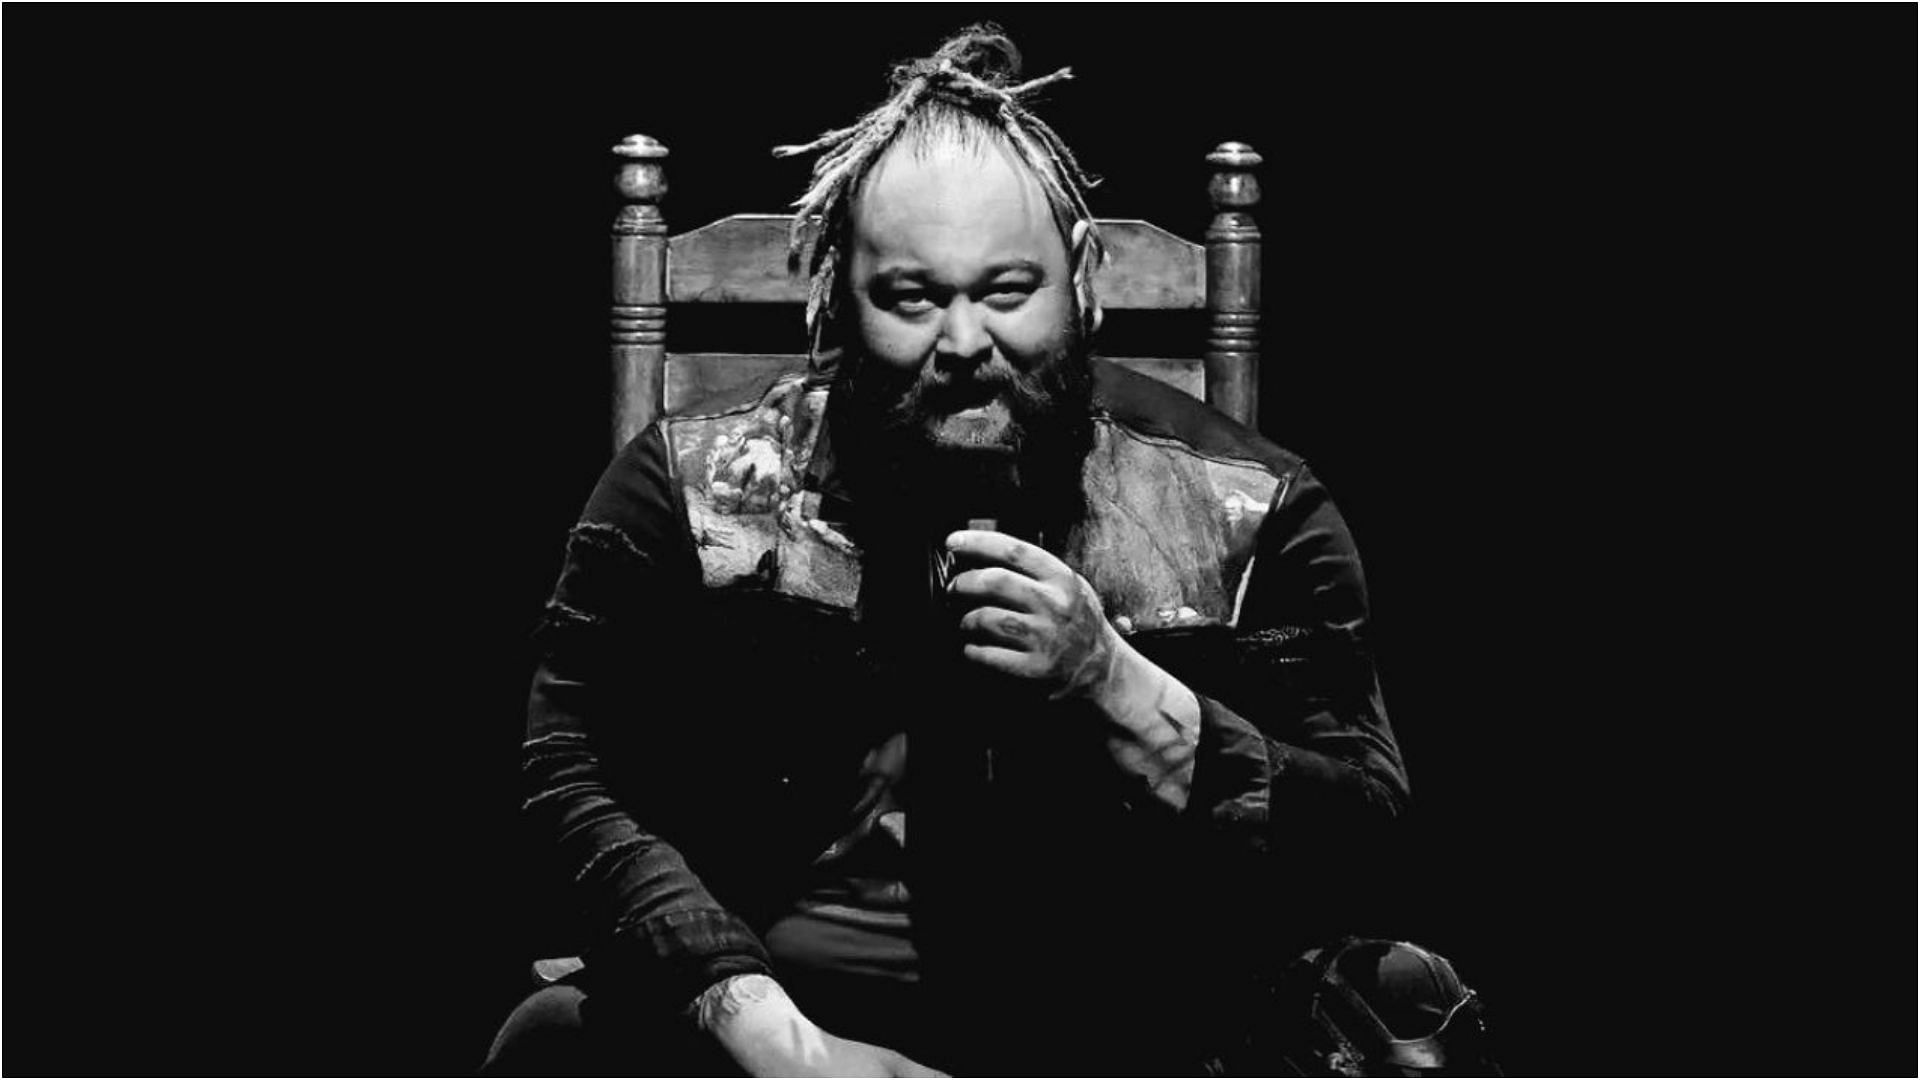  BRAY WYATT: THE BIOGRAPHY AND LIFE STORY, CHALLENGES